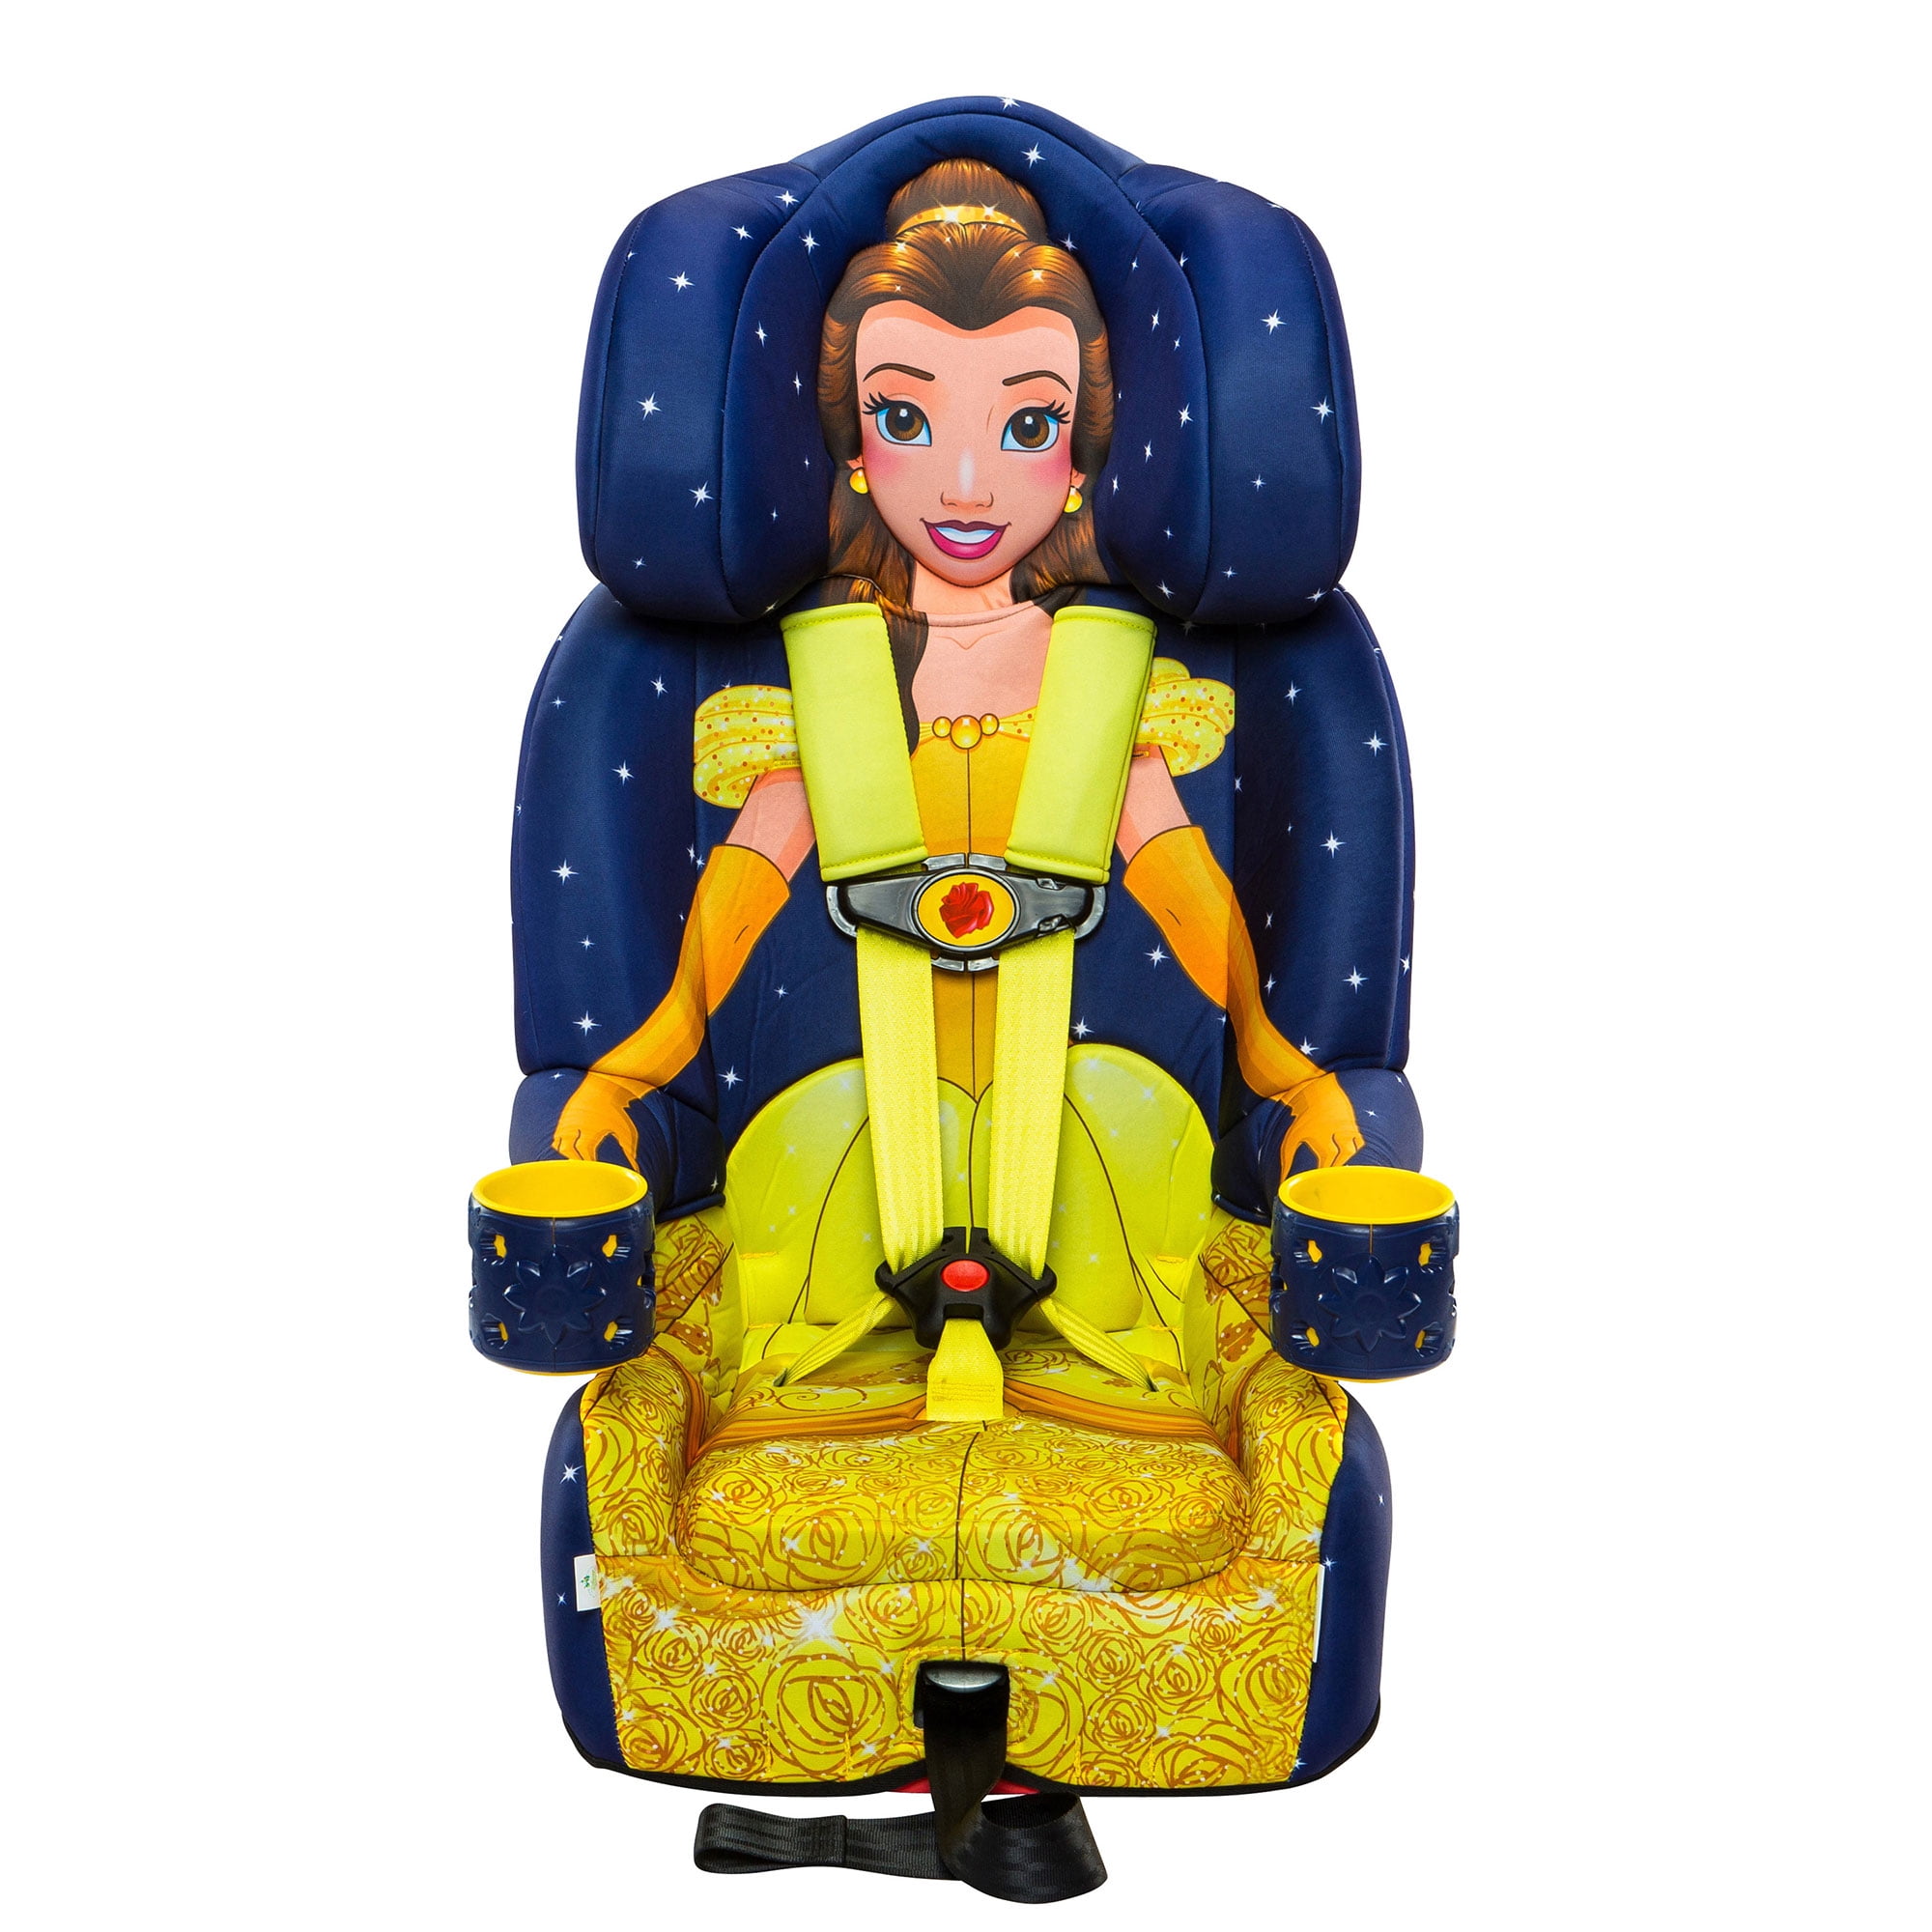 KidsEmbrace 2-in-1 Harness Booster Seat, Disney Beauty and the